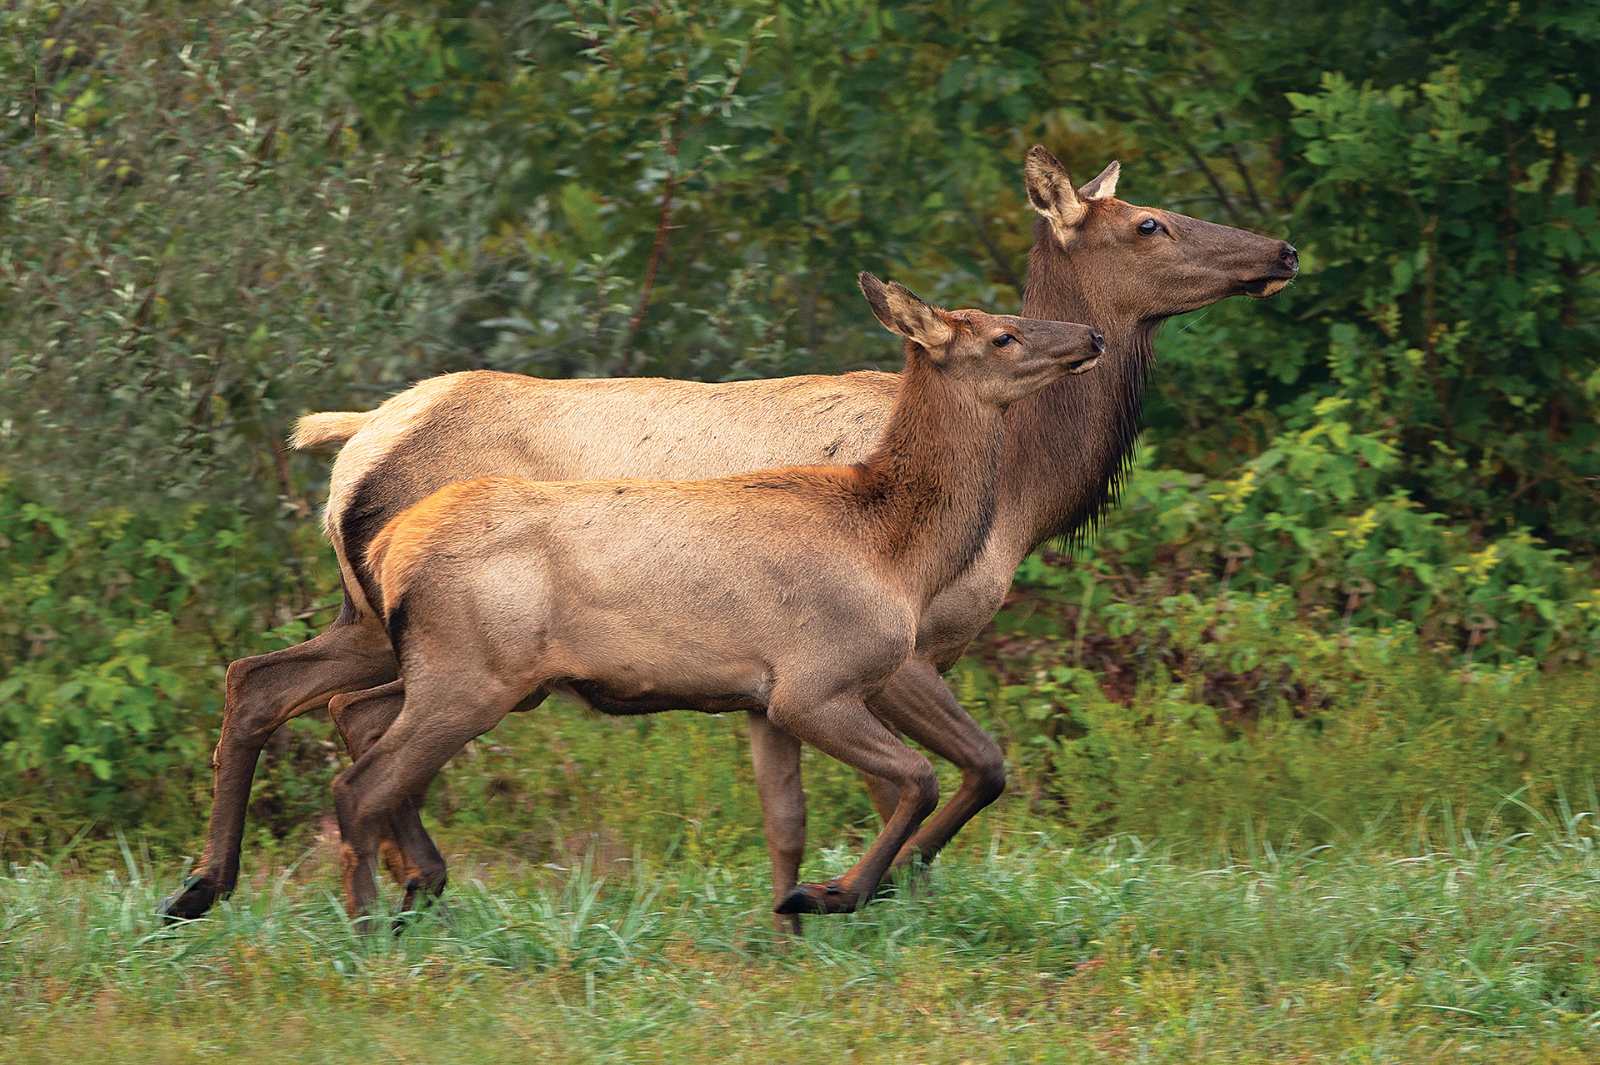 A mature cow elk and a smaller calf elk run in a field against a backdrop of trees.